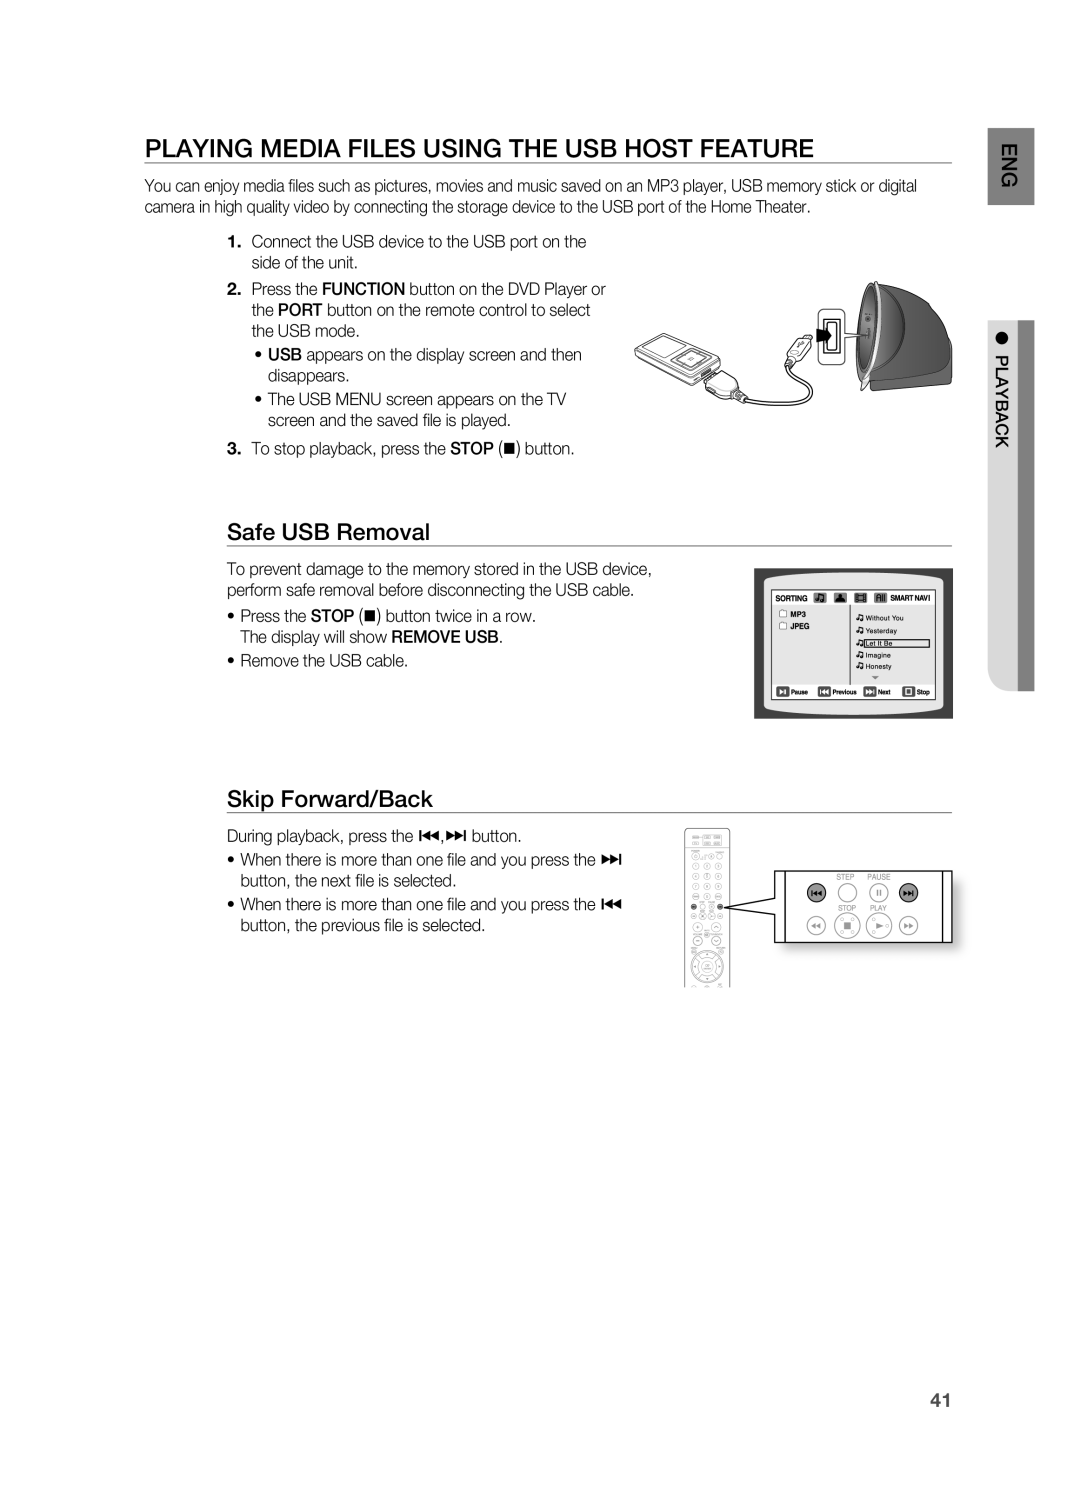 Samsung HT-X810 user manual PlAYING MEDIA FIlES USING THE USB HOST FEATUrE, Safe USB removal, Skip Forward/Back 